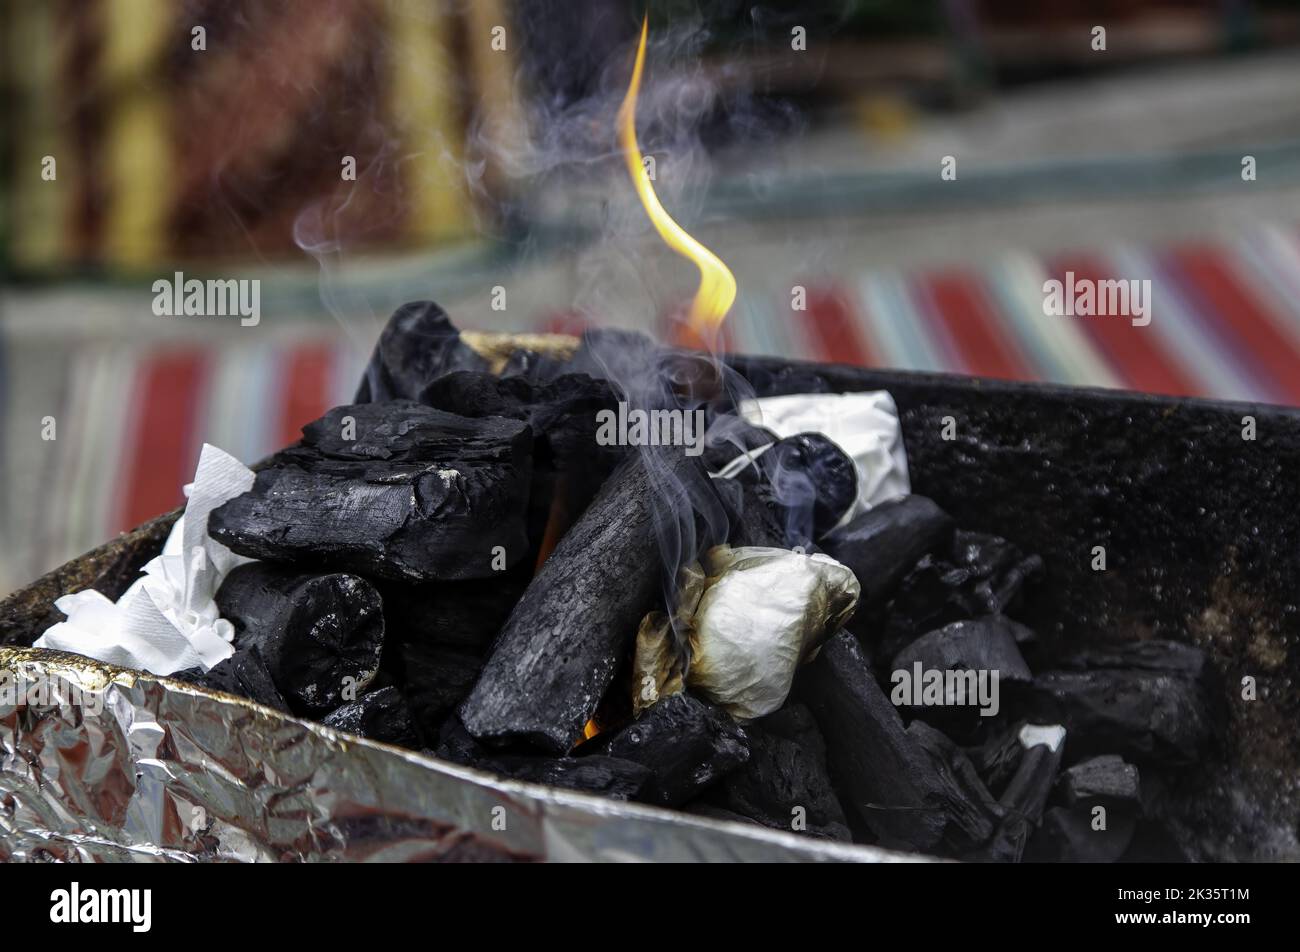 Detail of burning charcoal in a barbecue for cooking Stock Photo